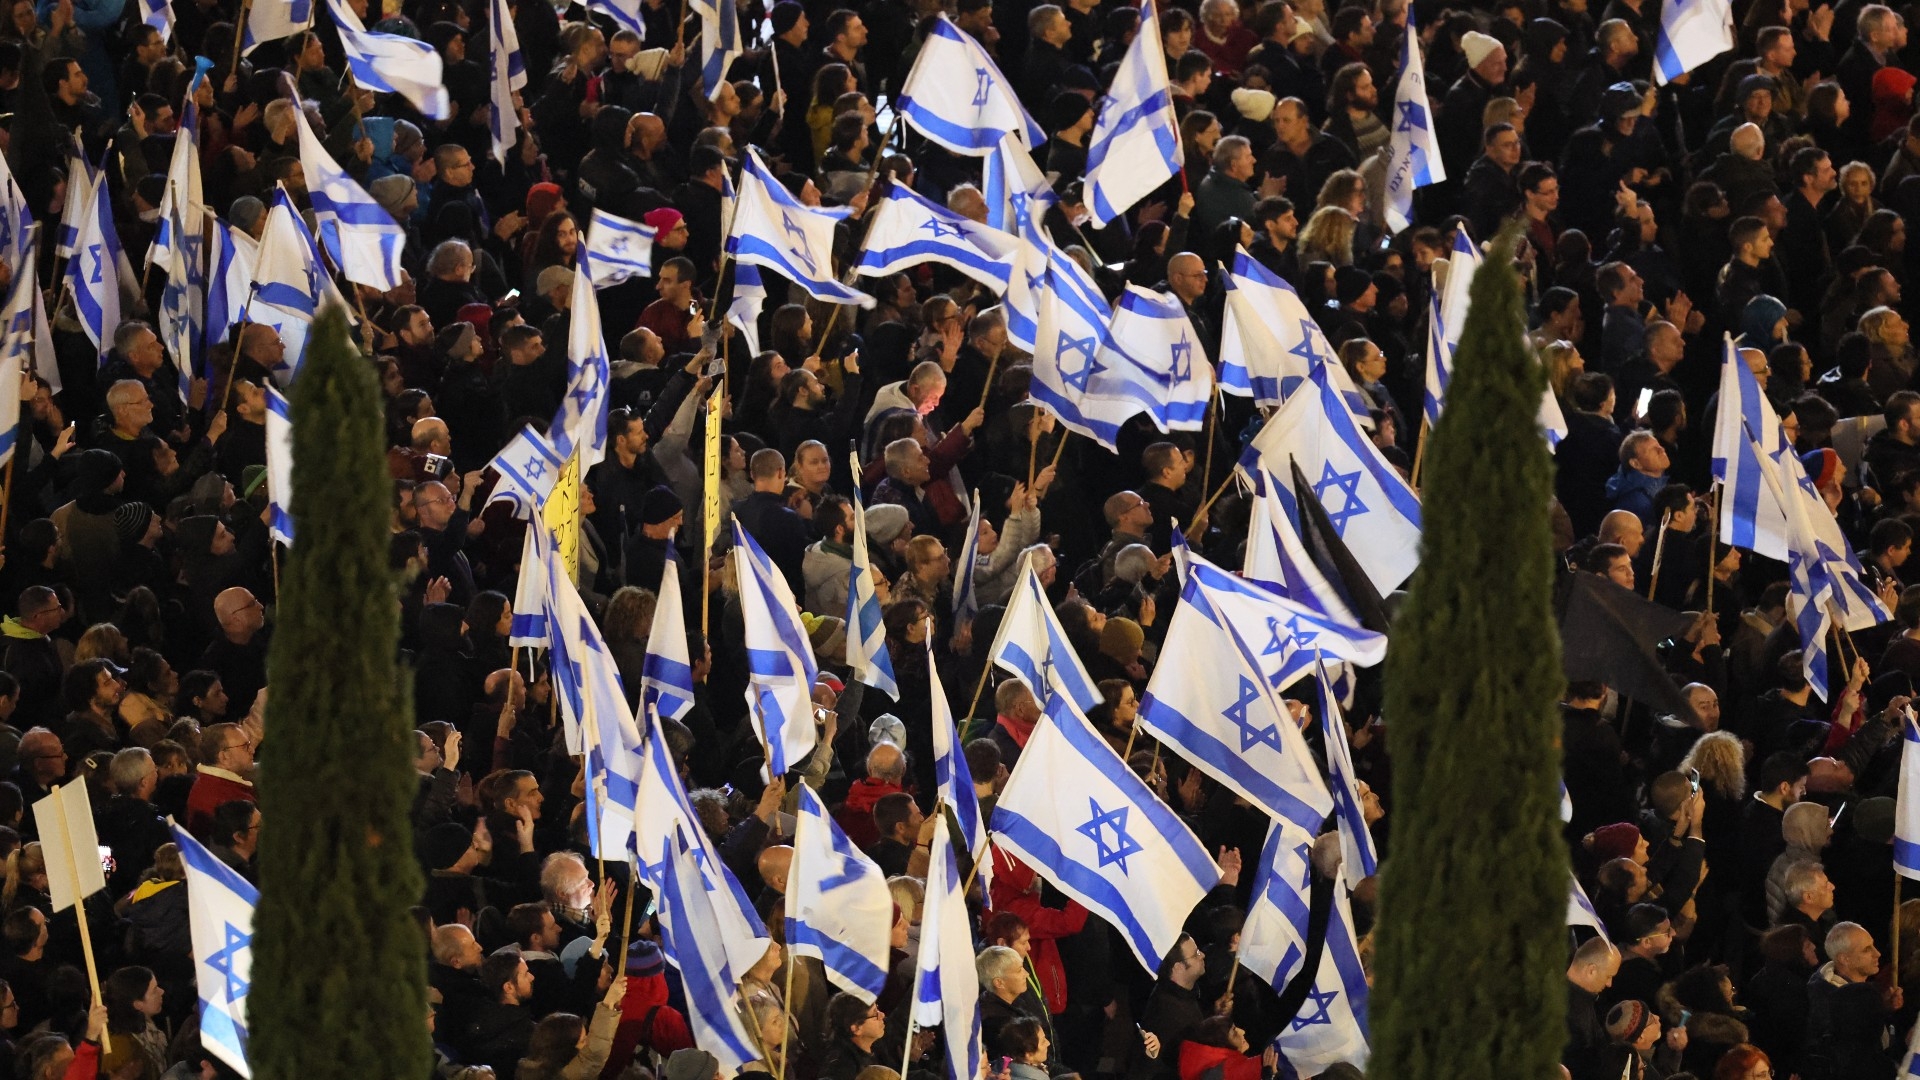 Israeli protesters attend a rally against Israel's new government in Tel Aviv on 14 January 2023 (AFP)